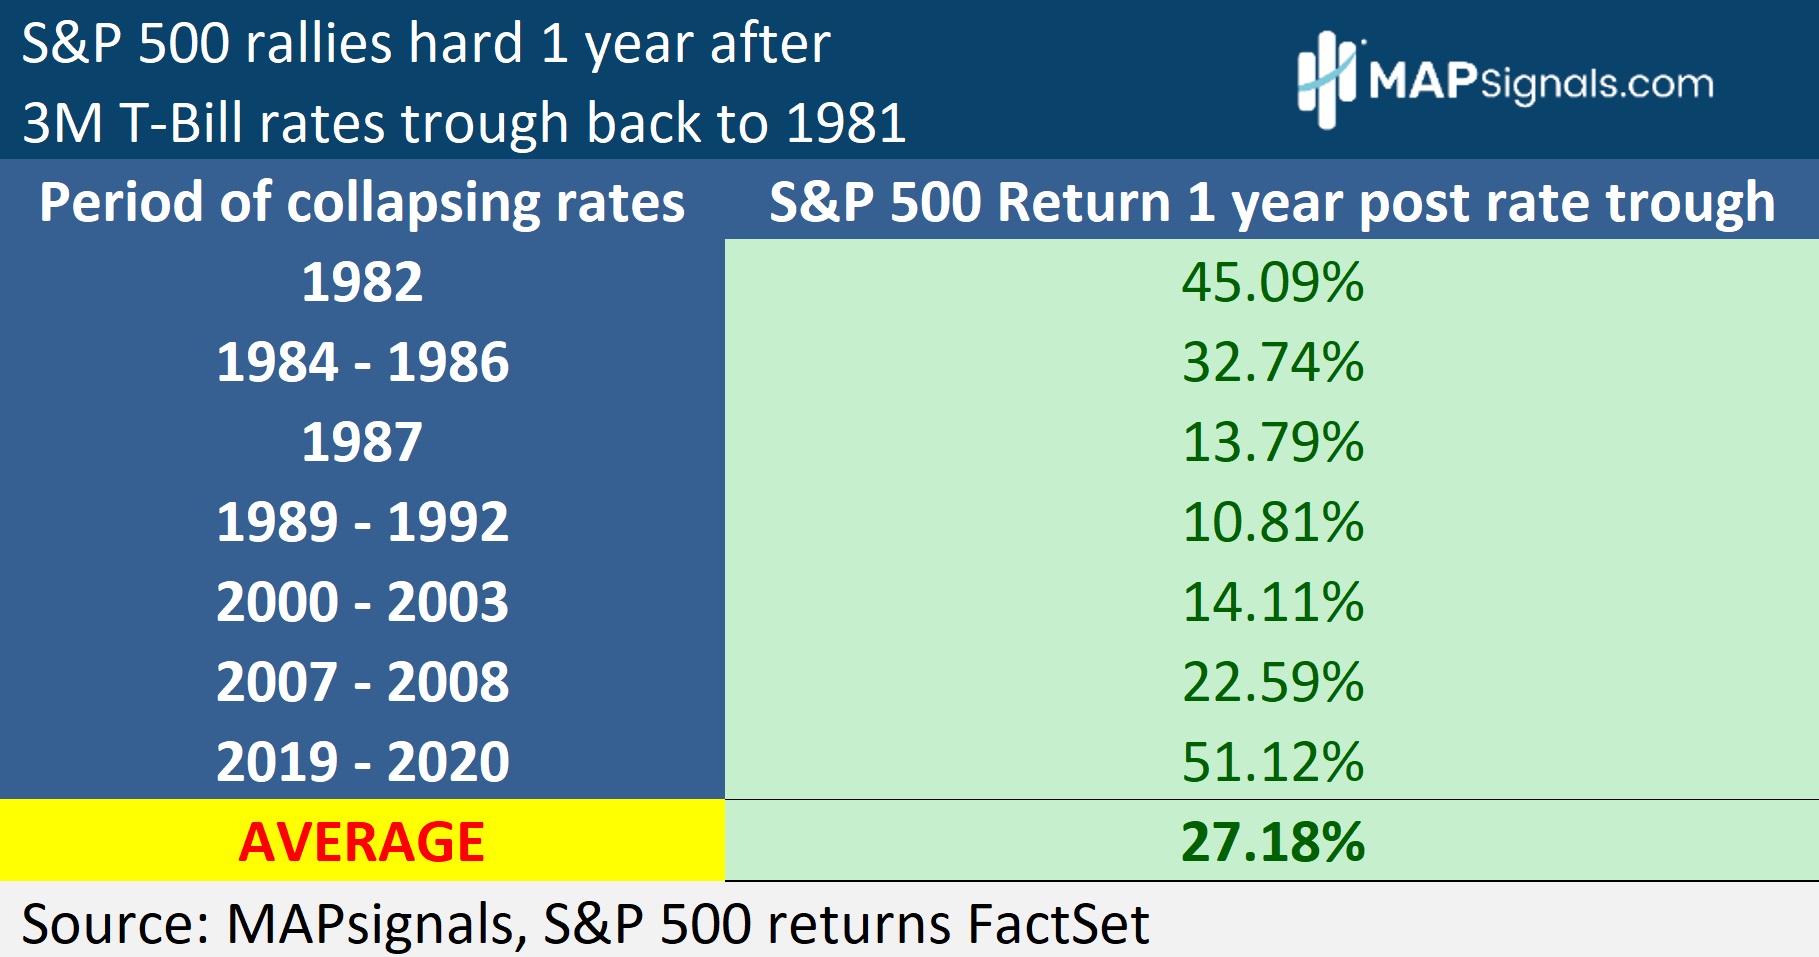 S&P 500 rallies hard 1 year after 3M T-Bill rates trough back to 1981 | MAPsignals